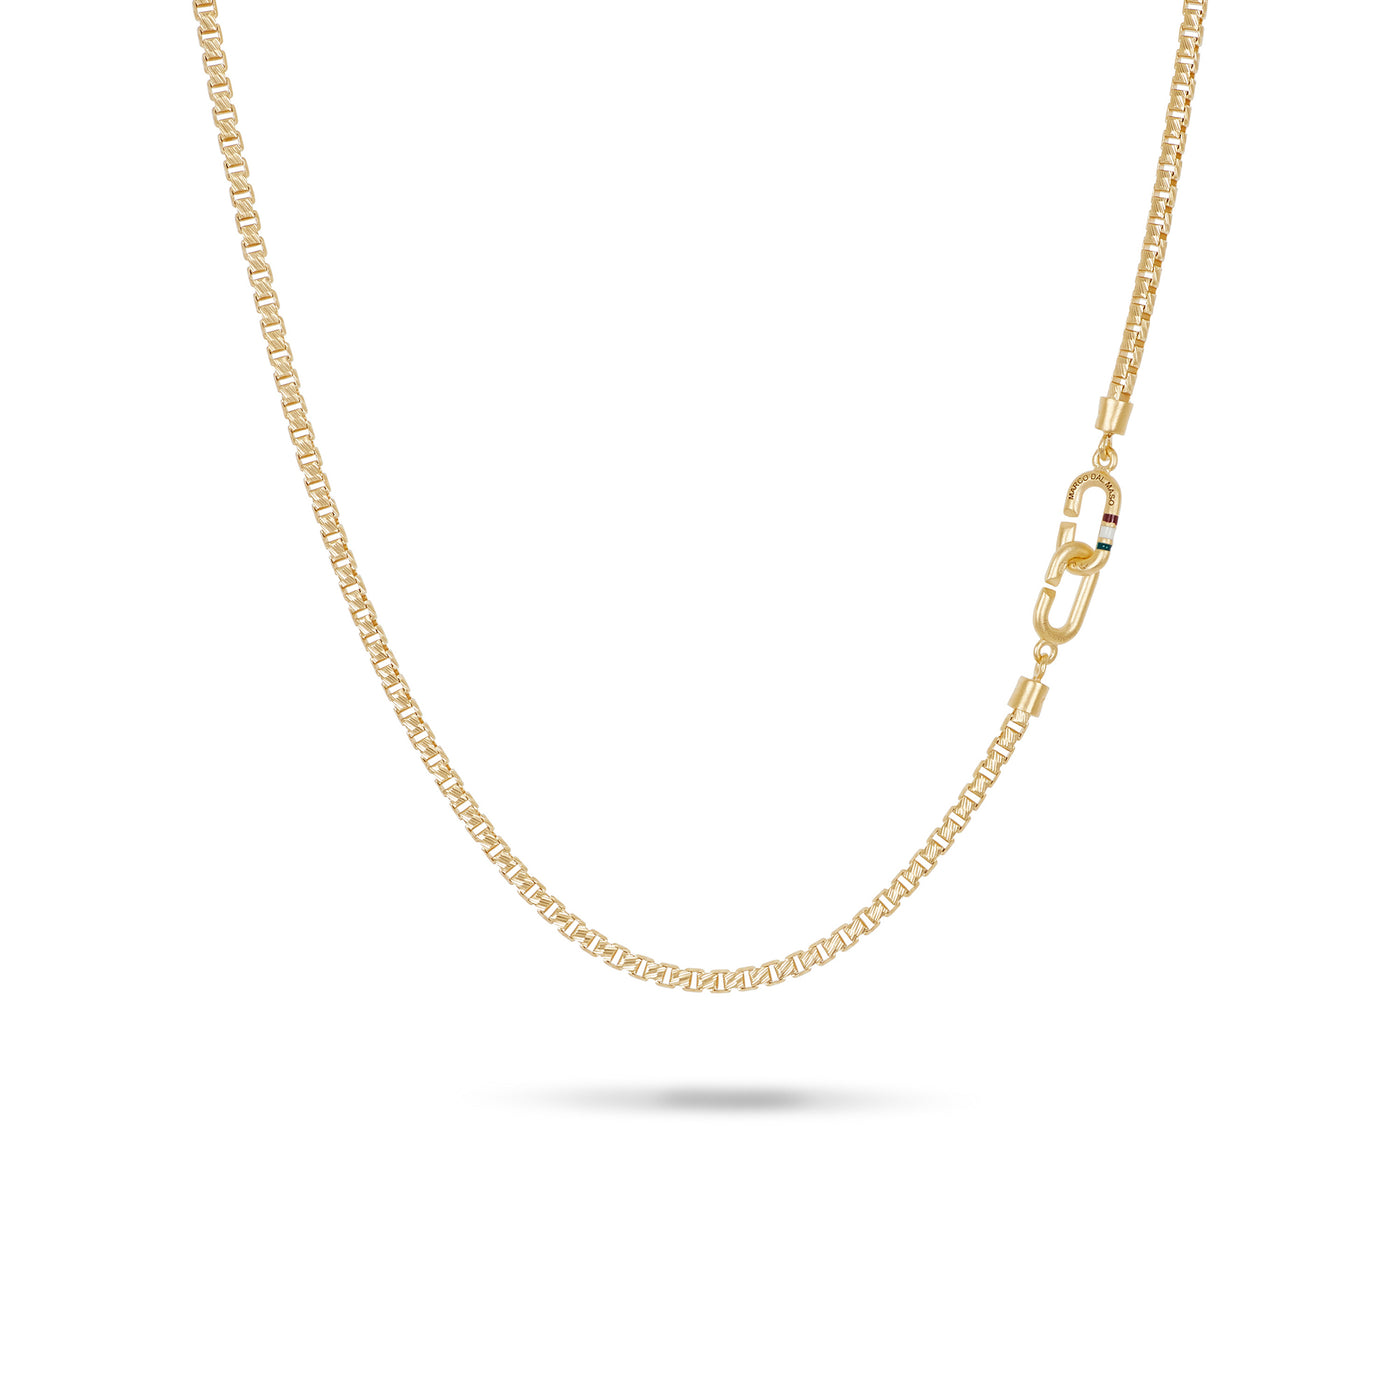 THE LINK 18K Yellow Gold Vermeil Chain